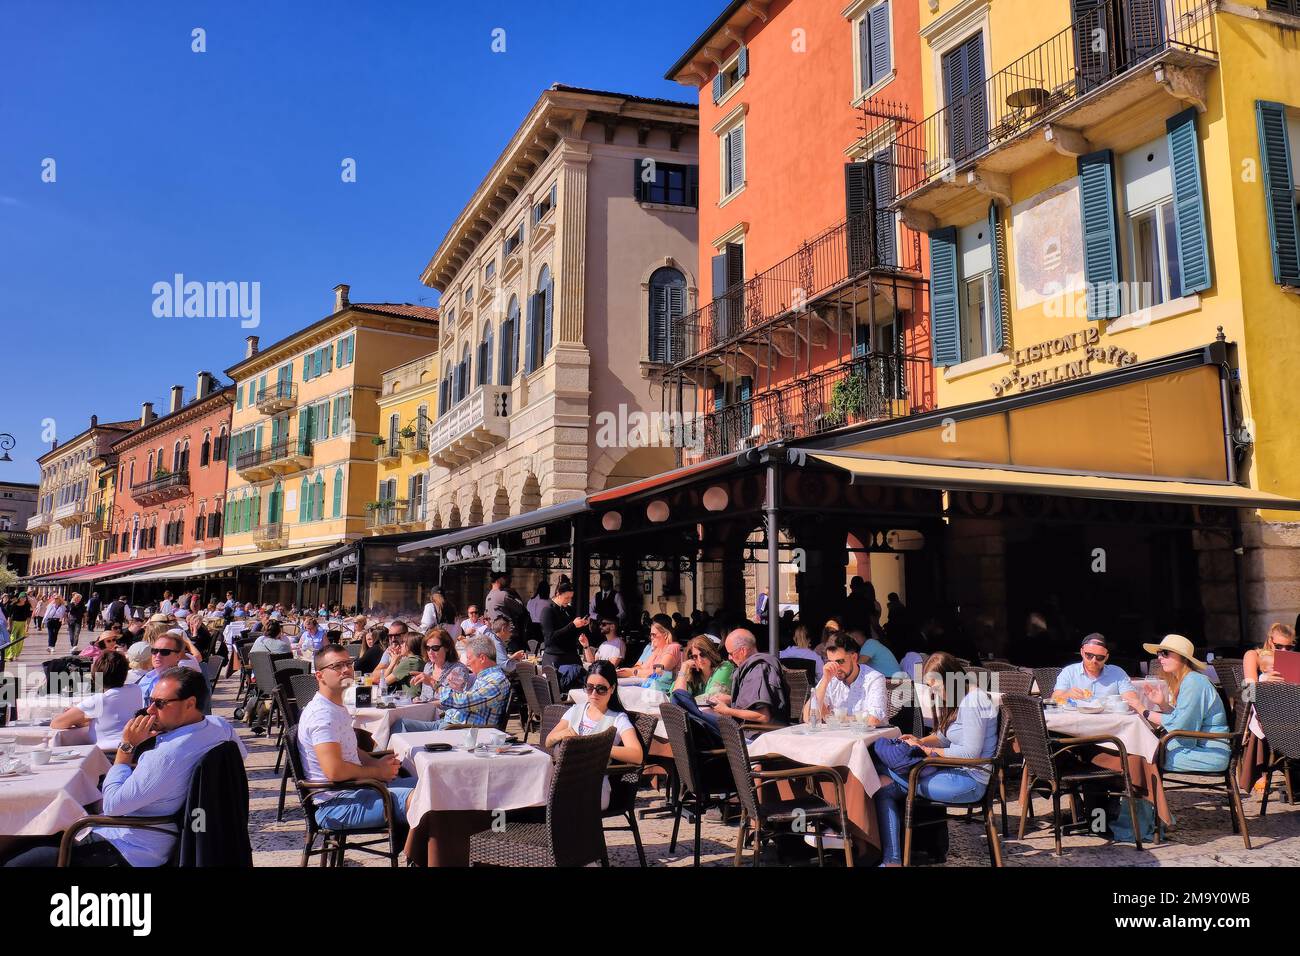 Verona: Colourful buildings with people eating lunch at restaurants in Piazza Bra, Verona, Veneto, Italy Stock Photo